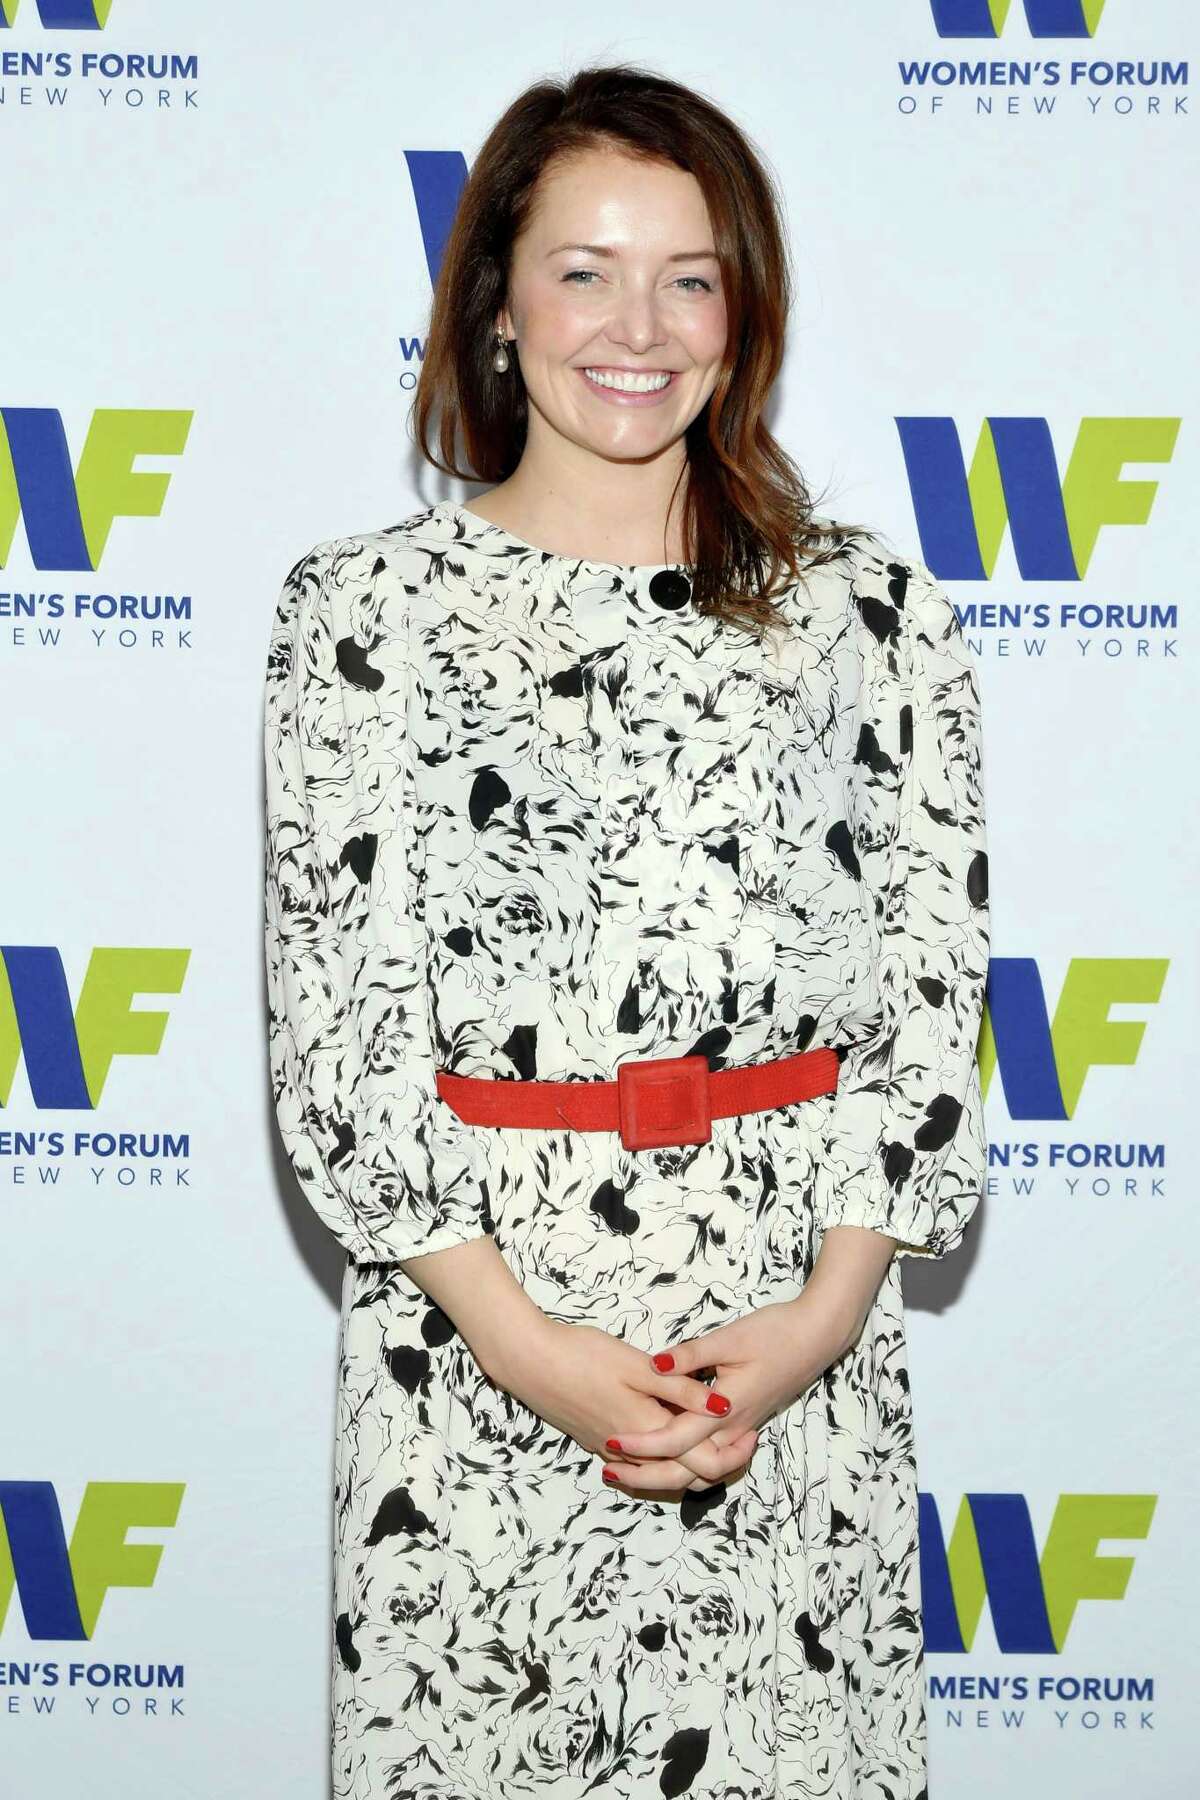 Lindsey Boylan attends The 9th Annual Elly Awards Hosted By The Women's Forum Of New York on June 17, 2019 in New York City. Boylan accused Gov. Andrew Cuomo of sexual harassment in 2020. A new bill in the state Senate in 2021 looks to prevent retaliation by employees who file complaints of sexual harassment by preventing the leaking of their personnel file.